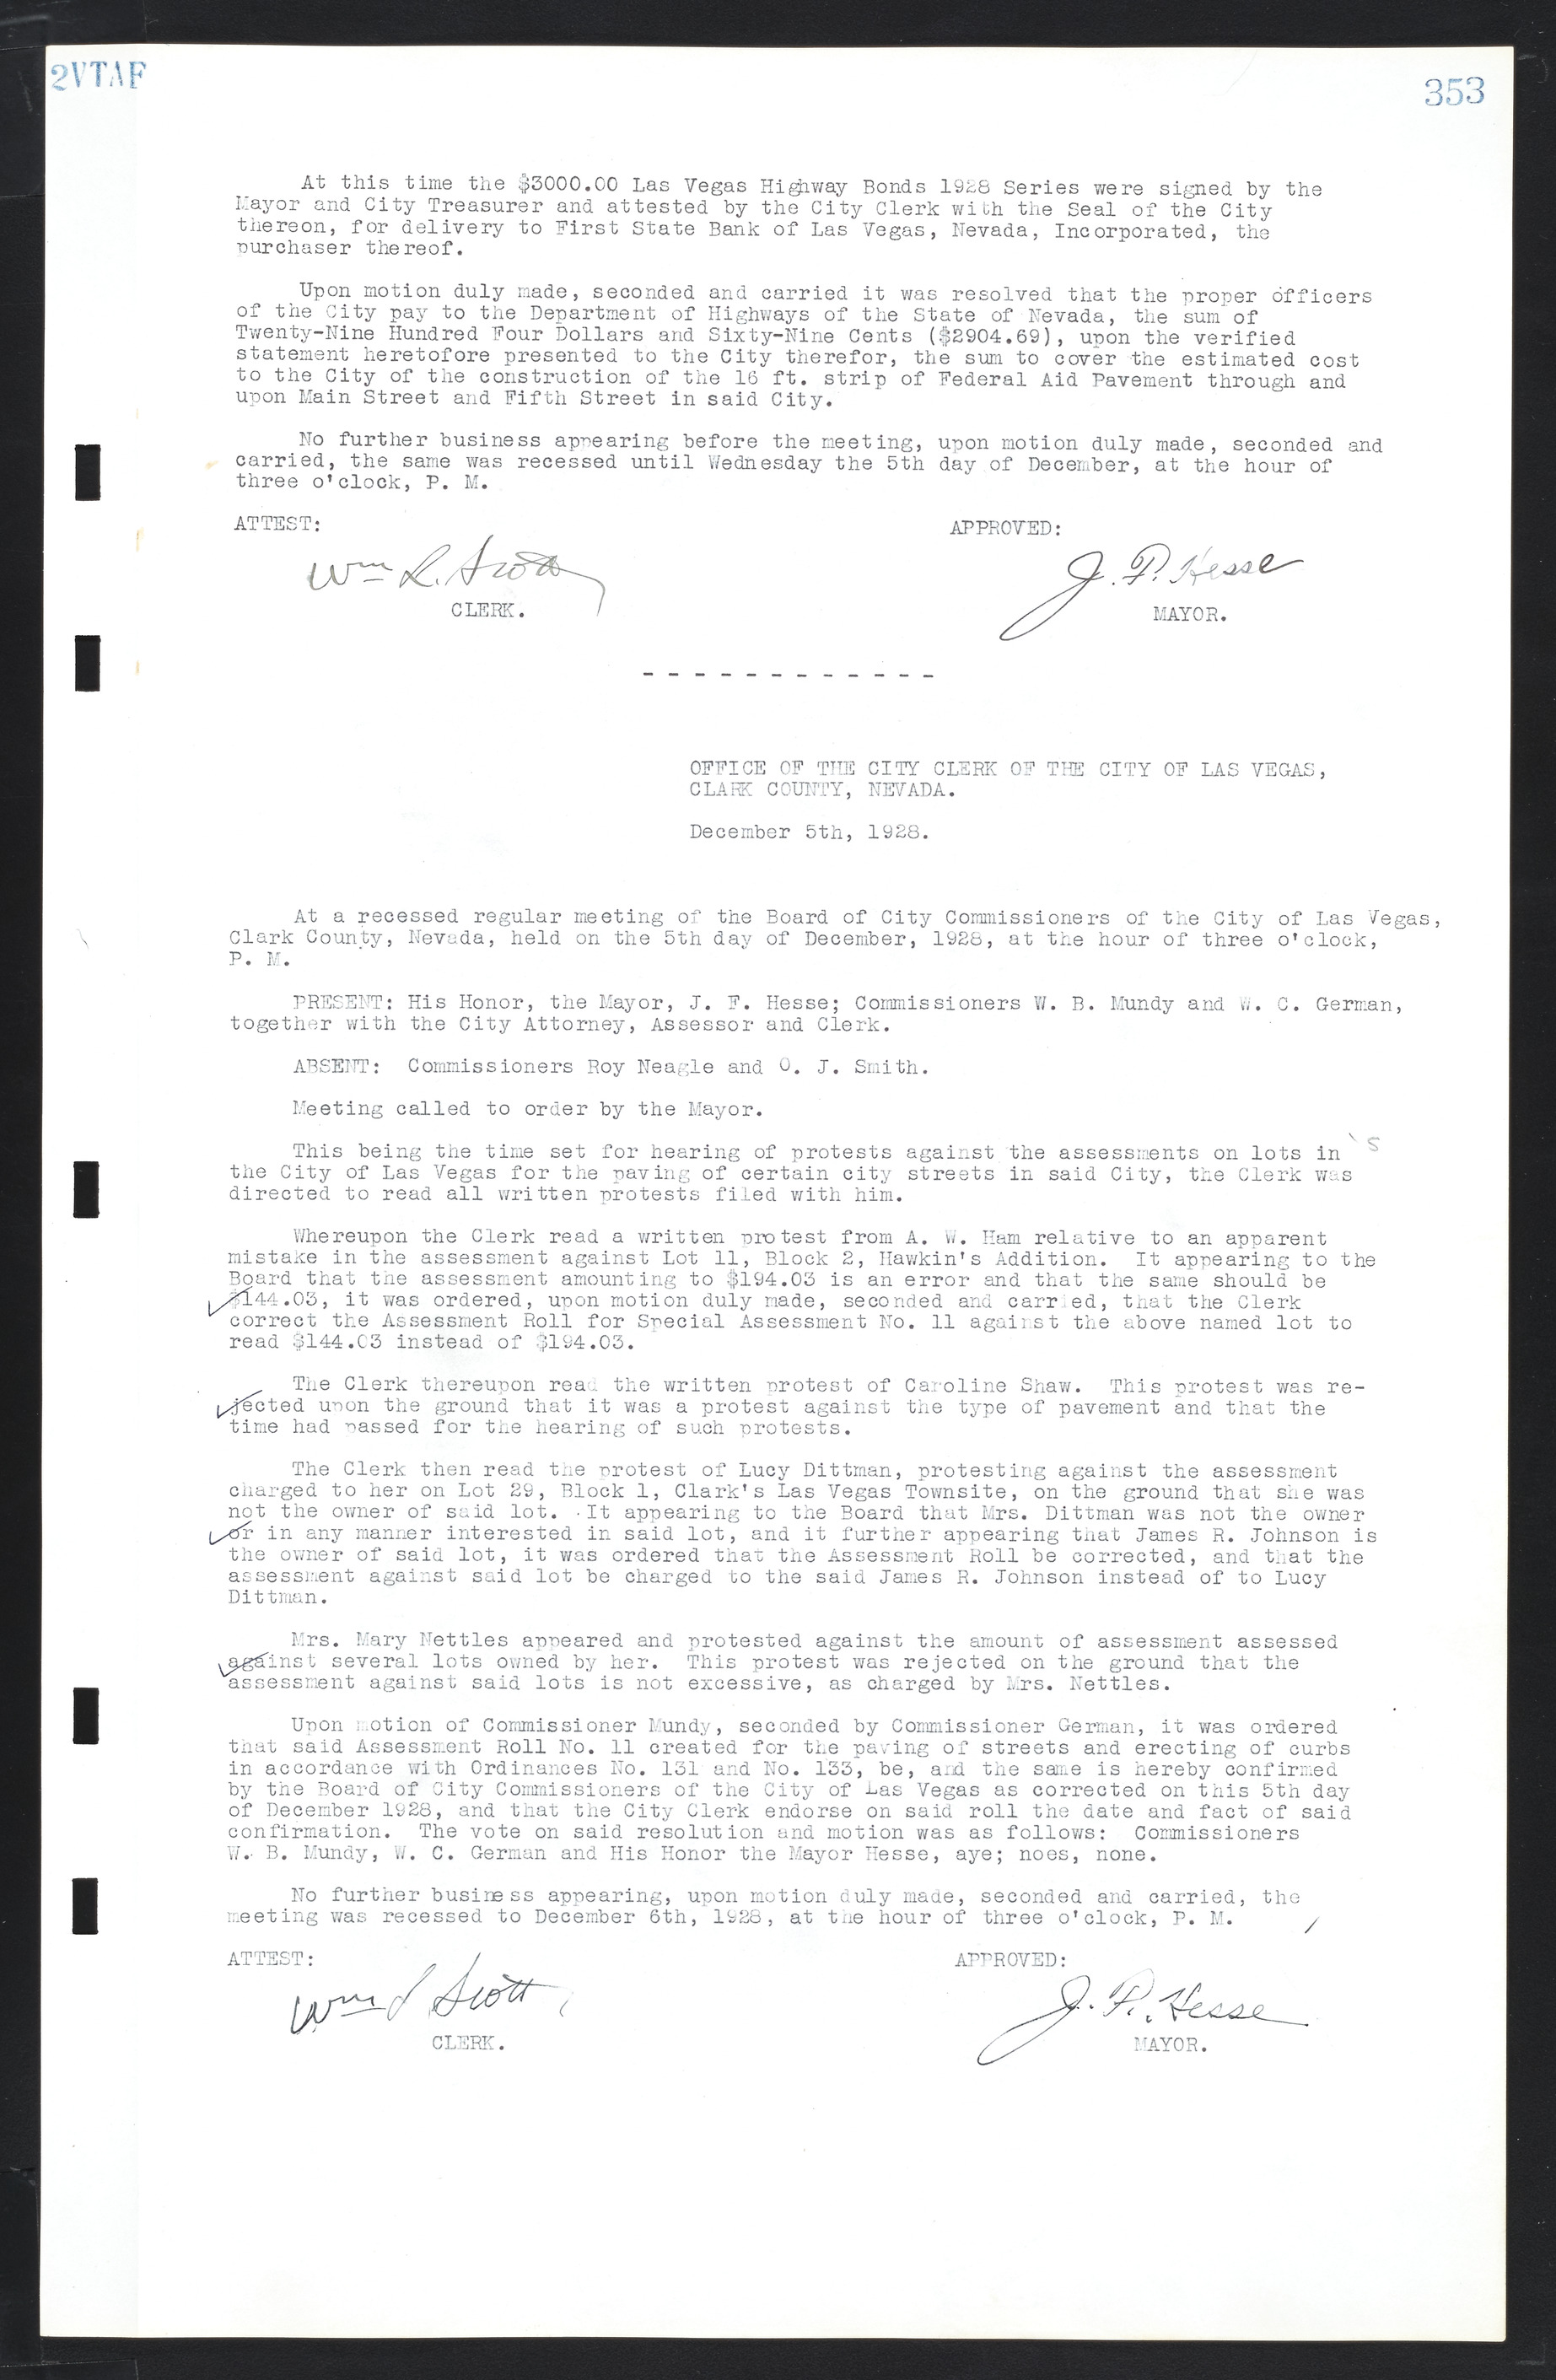 Las Vegas City Commission Minutes, March 1, 1922 to May 10, 1929, lvc000002-362